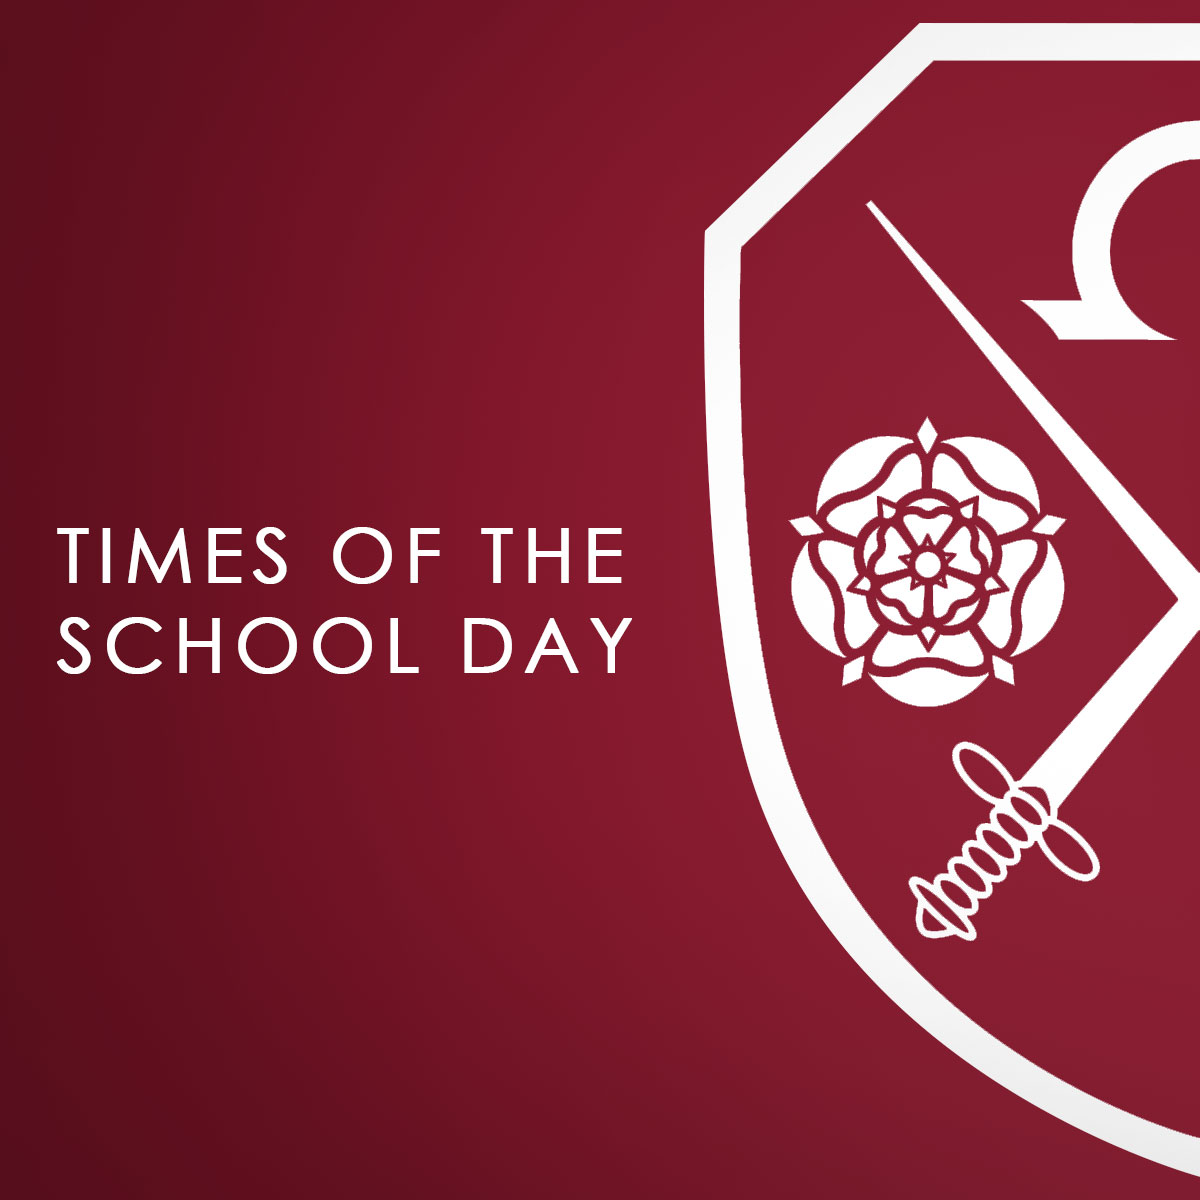 A maroon background with the East Barnet School logo which says Times of the School Day